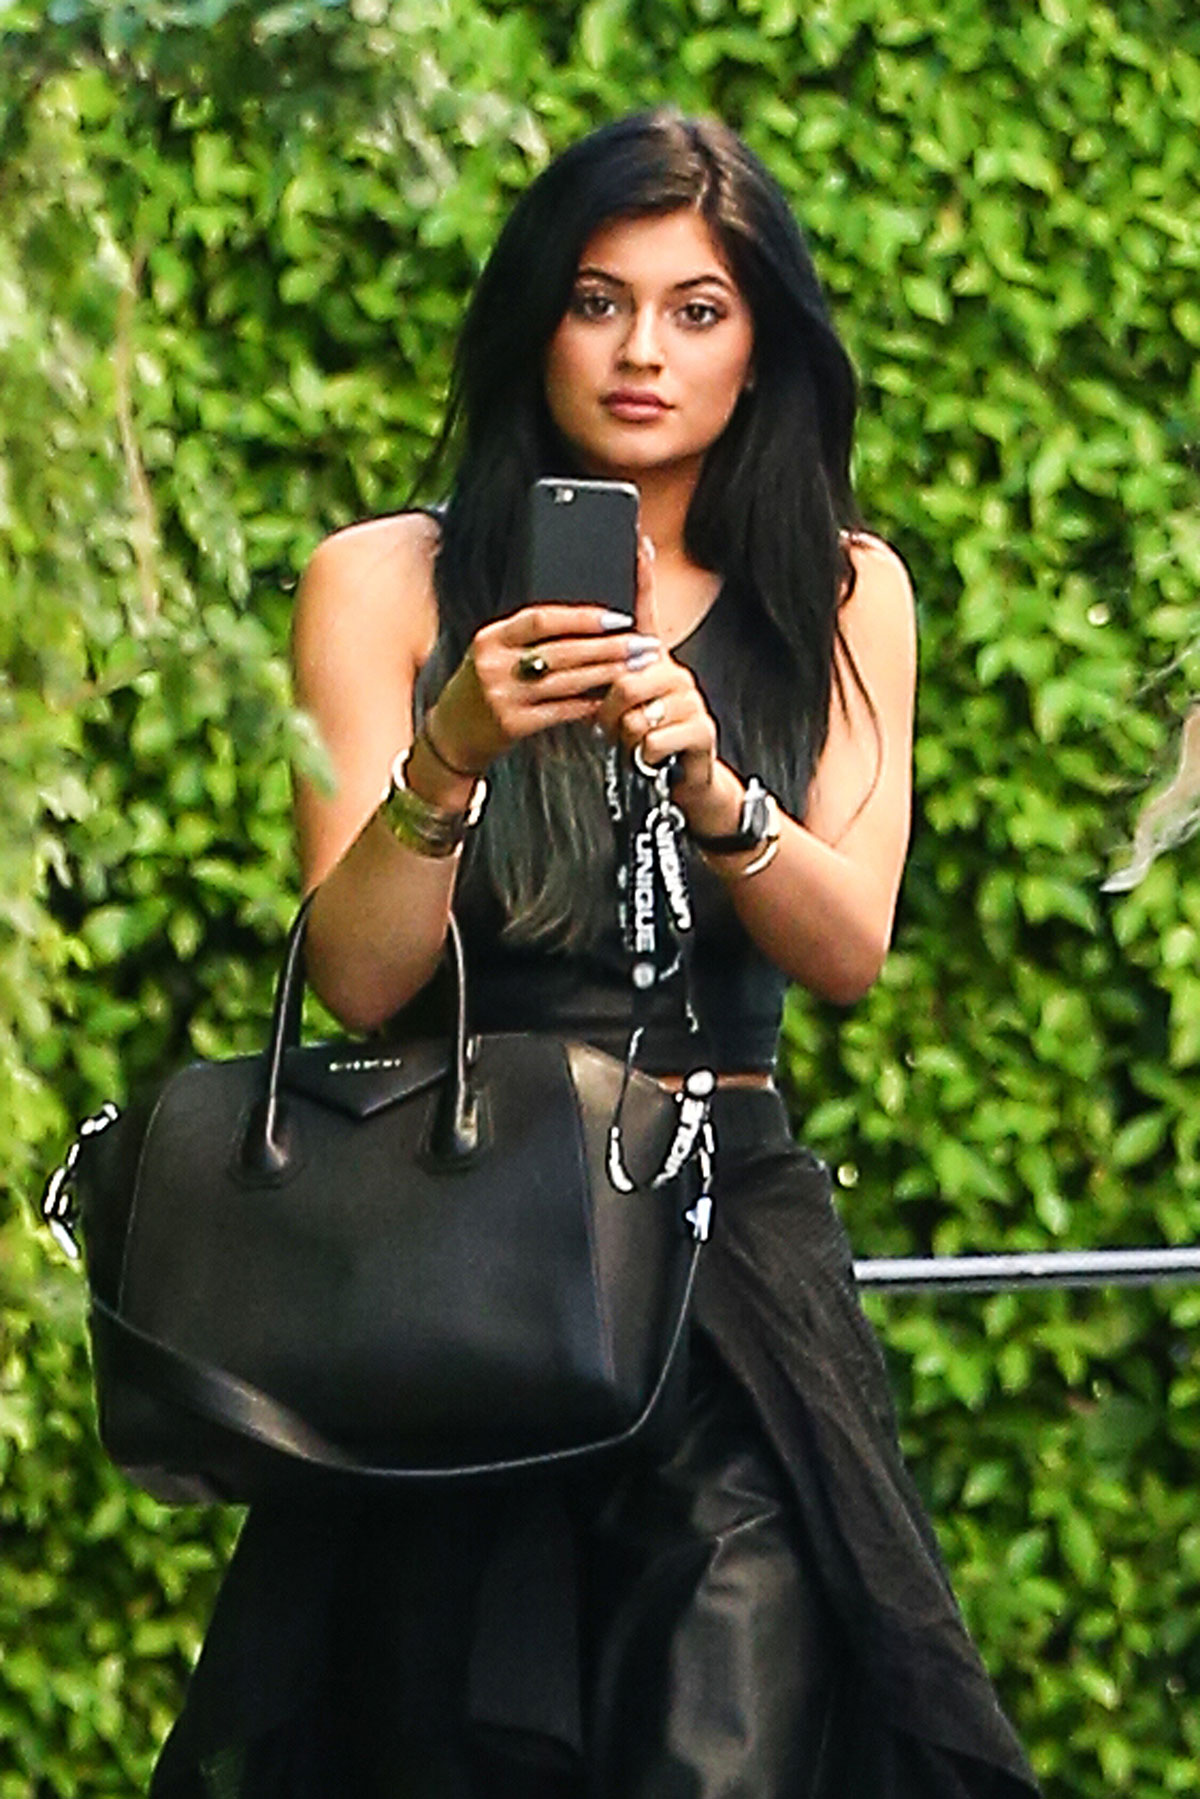 Kylie Jenner out in Calabasas